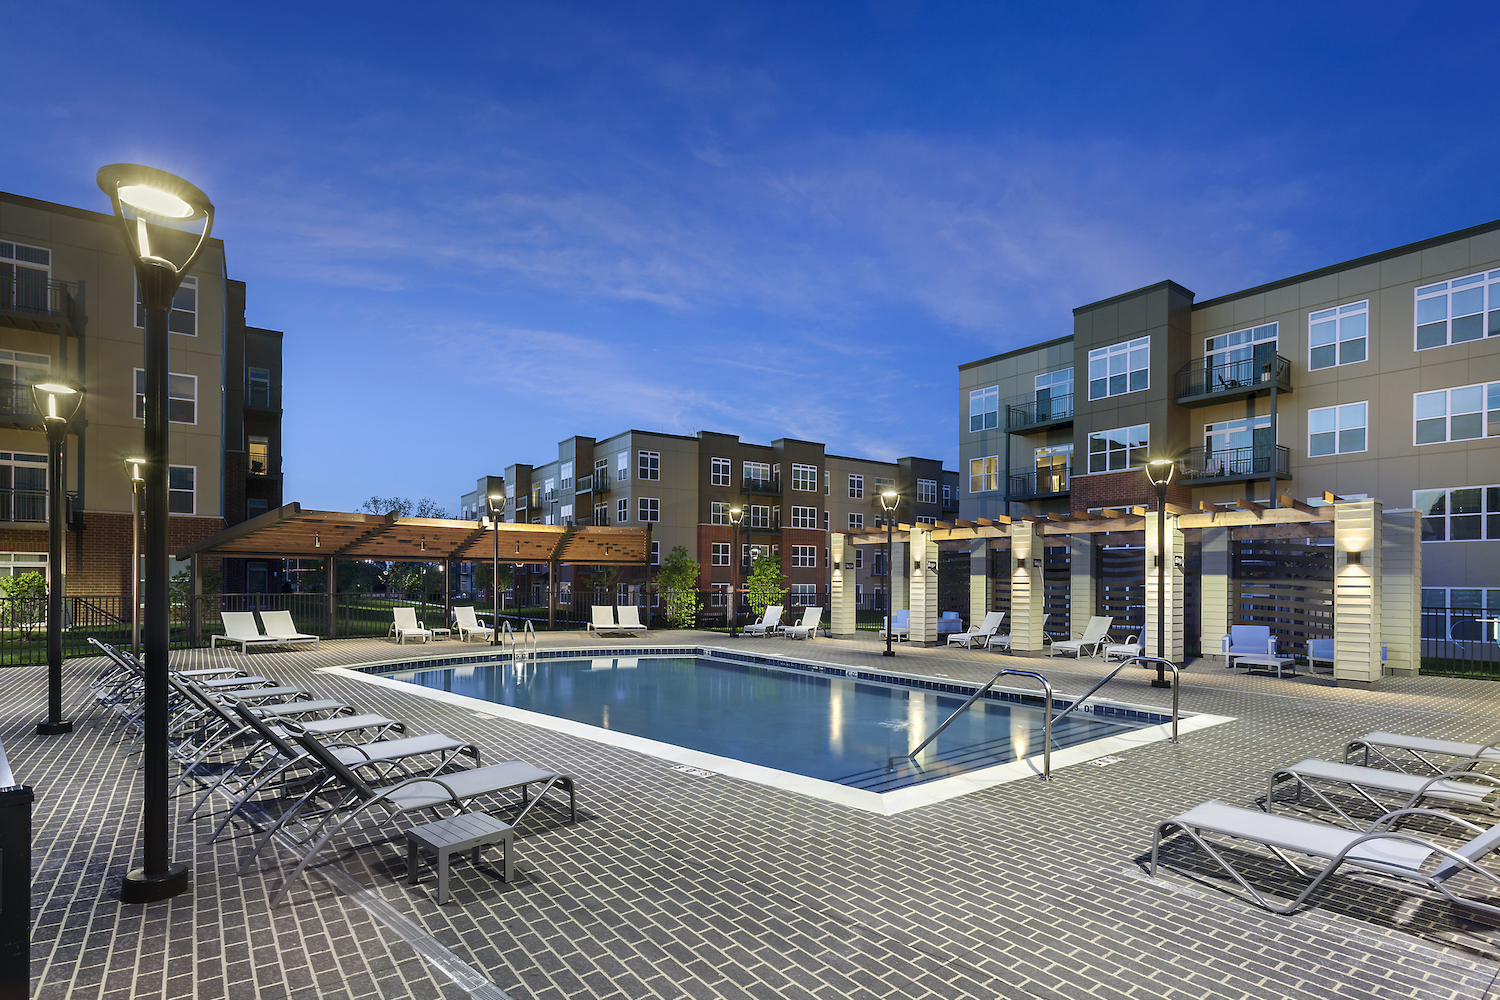 JVM Realty Buys Multifamily Property in Illinois